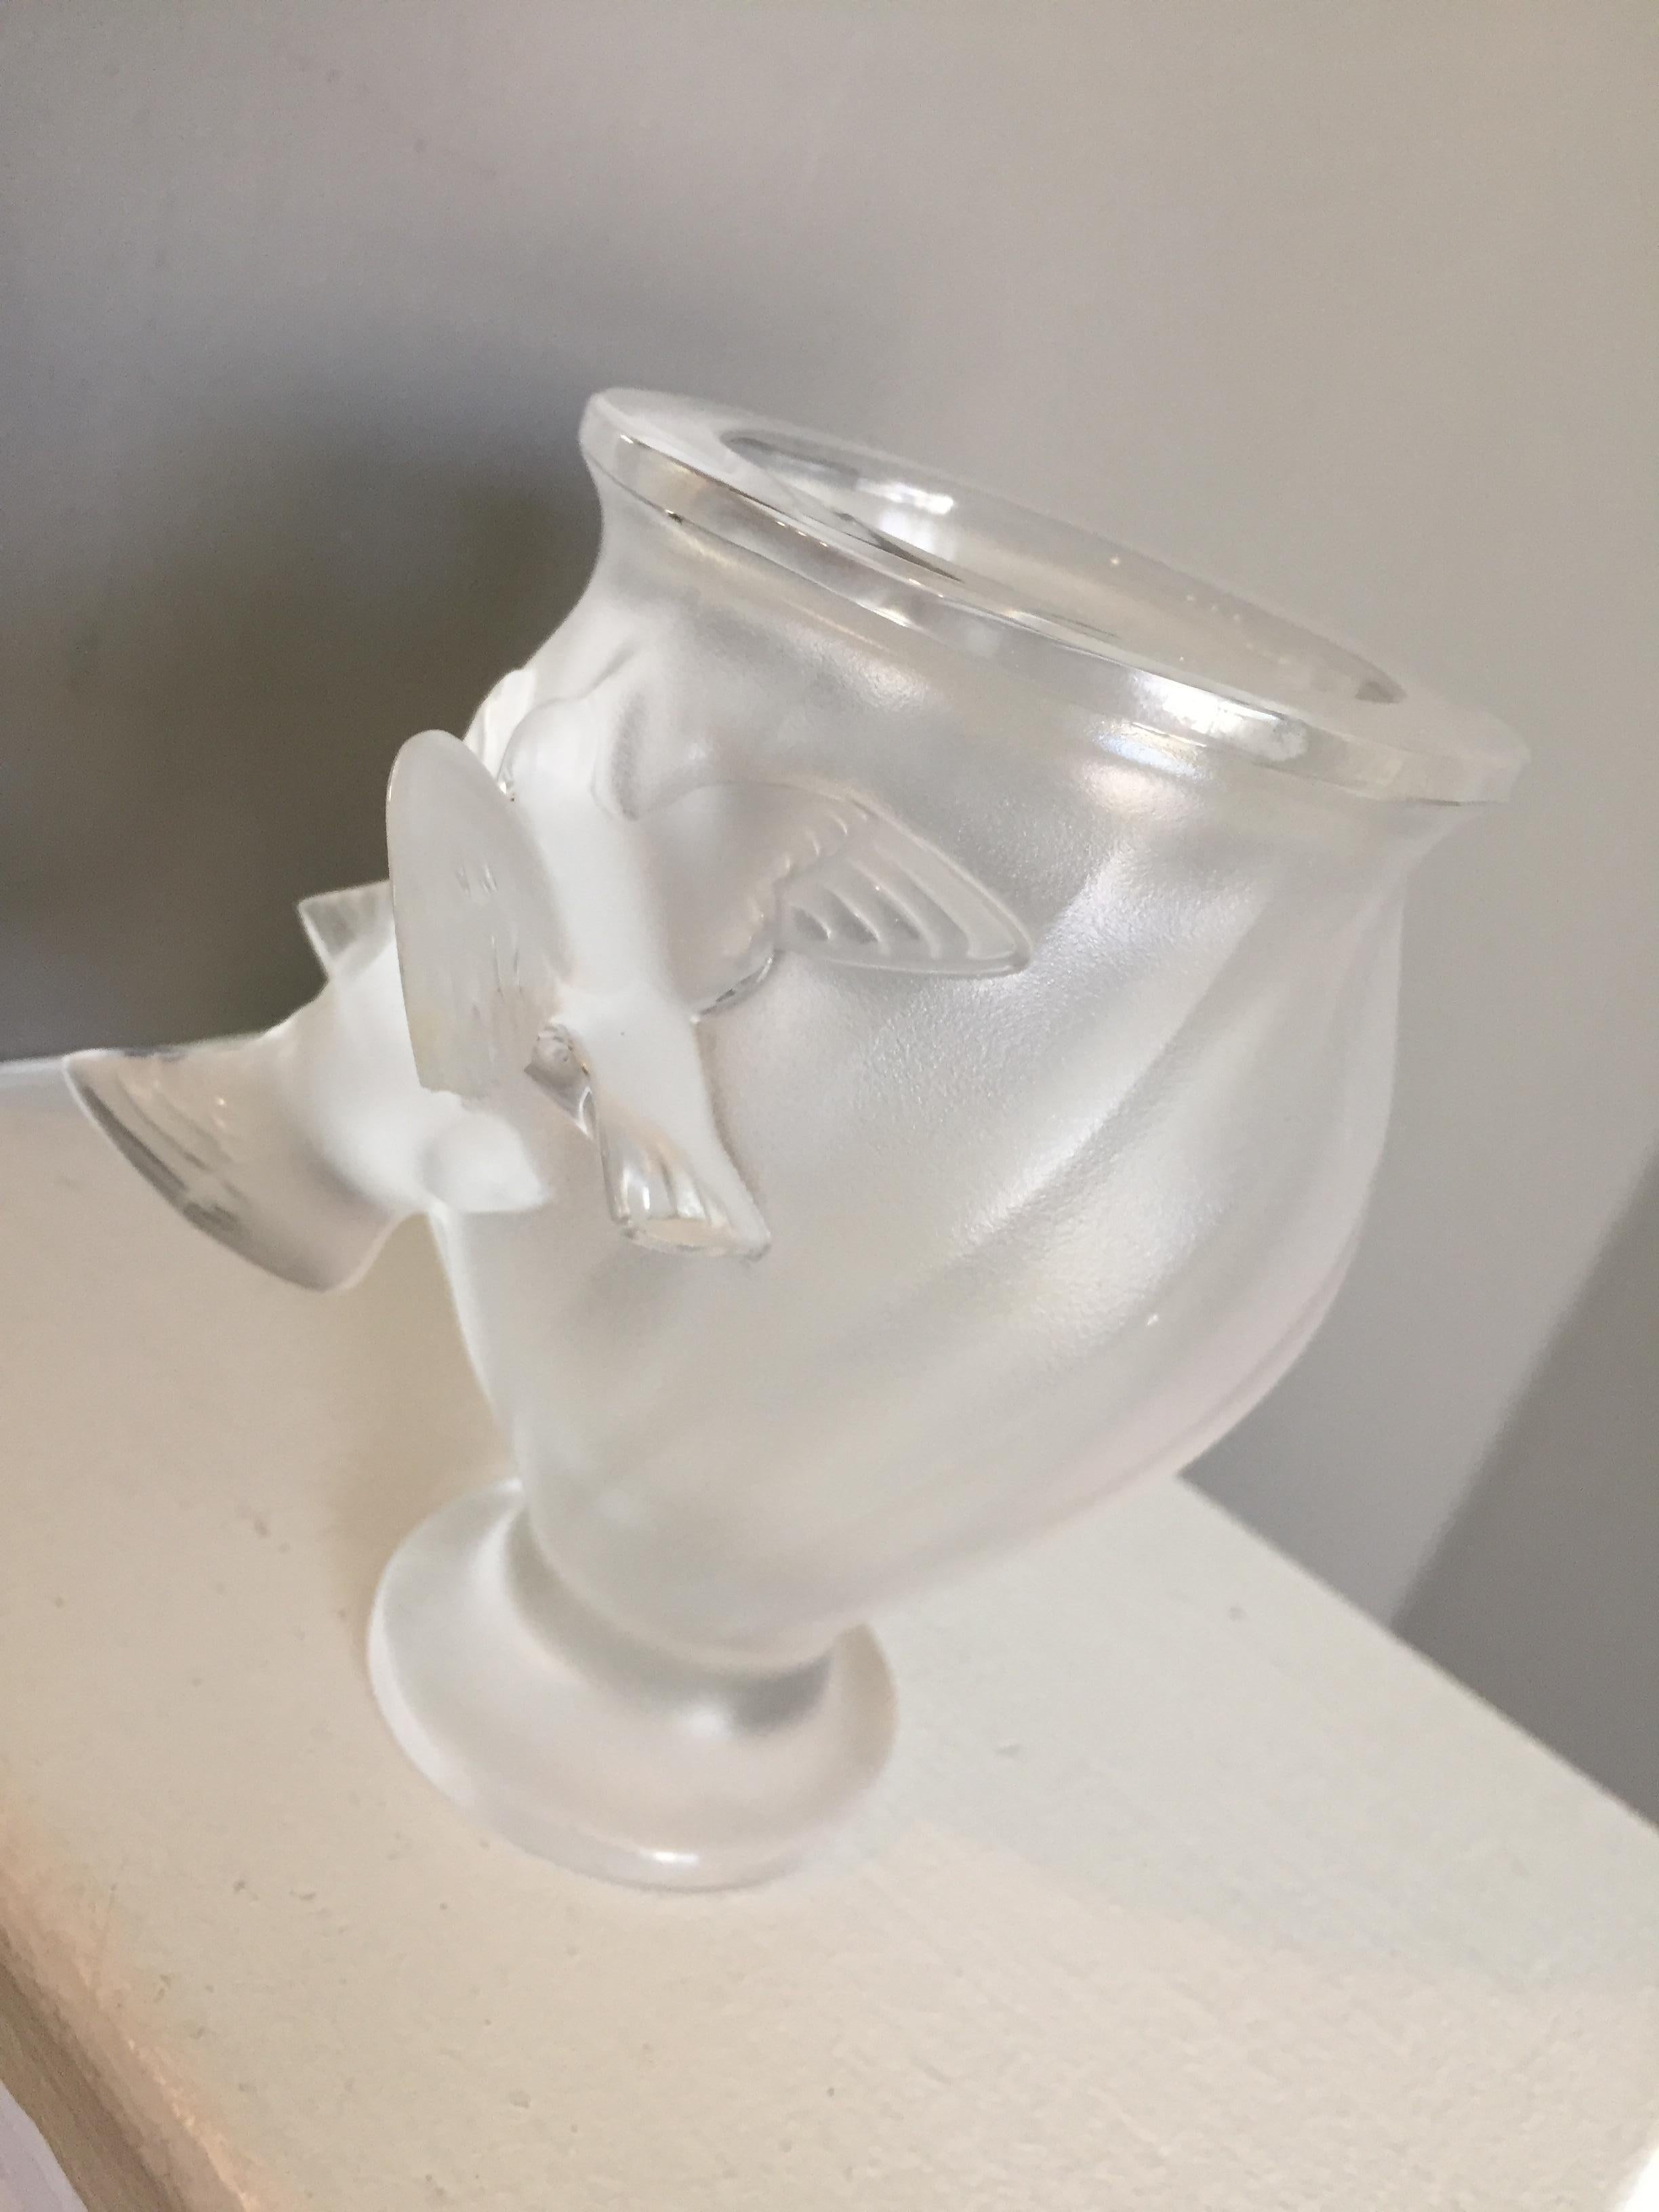 Lalique Rosine vase
The smaller version of Rosine vase with flying doves in relief by Lalique.
This wonderful vase features an all-over molded swirl design on the frosted glass body and features a beautiful pair of soaring doves in high relief on